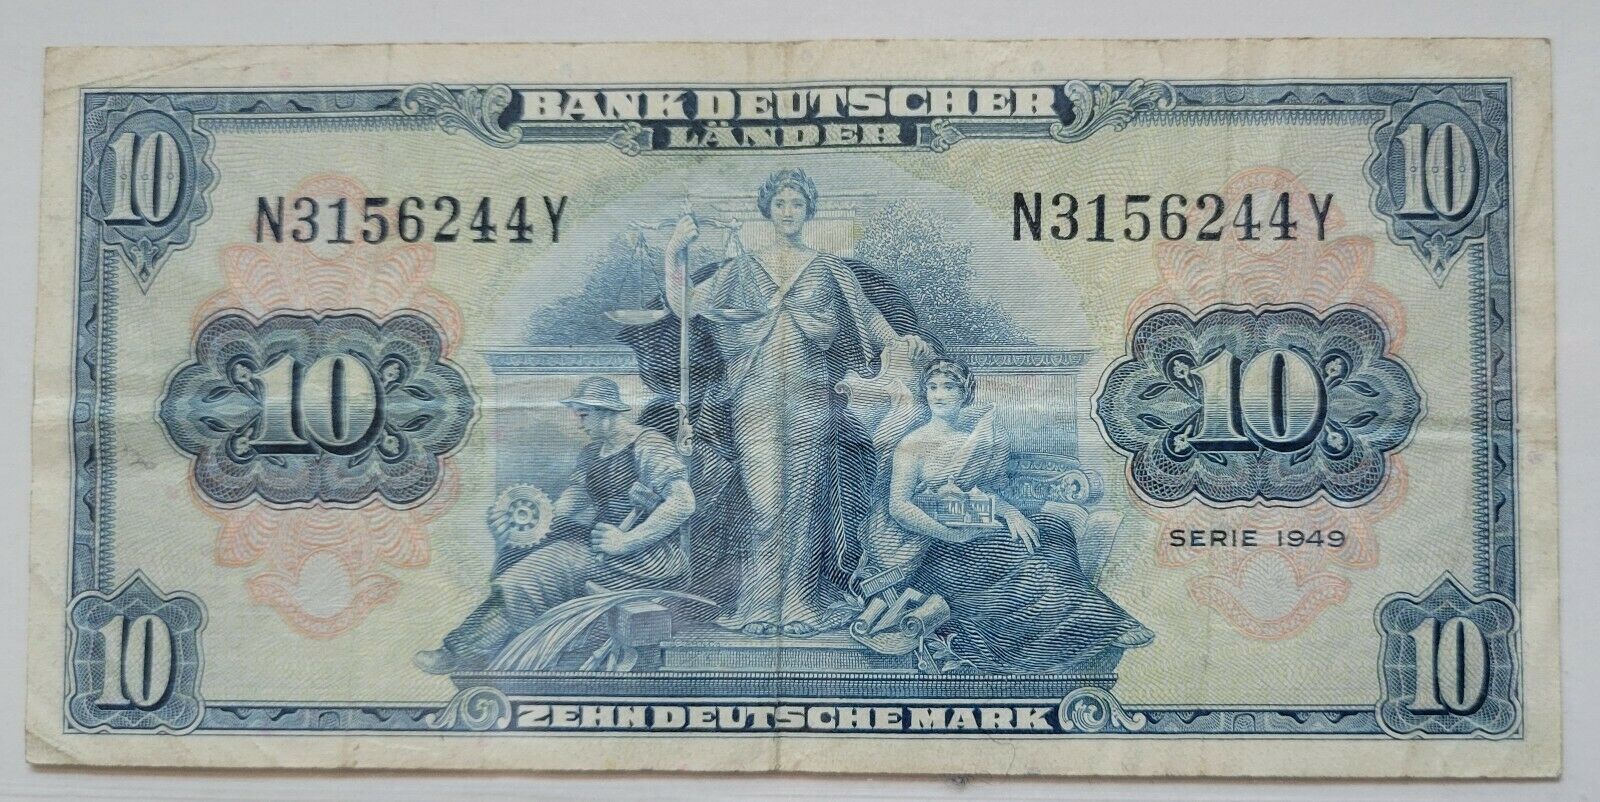 Primary image for GERMANY 10 MARK BANKNOTE FROM 1949 XF VERY RARE GERMANY